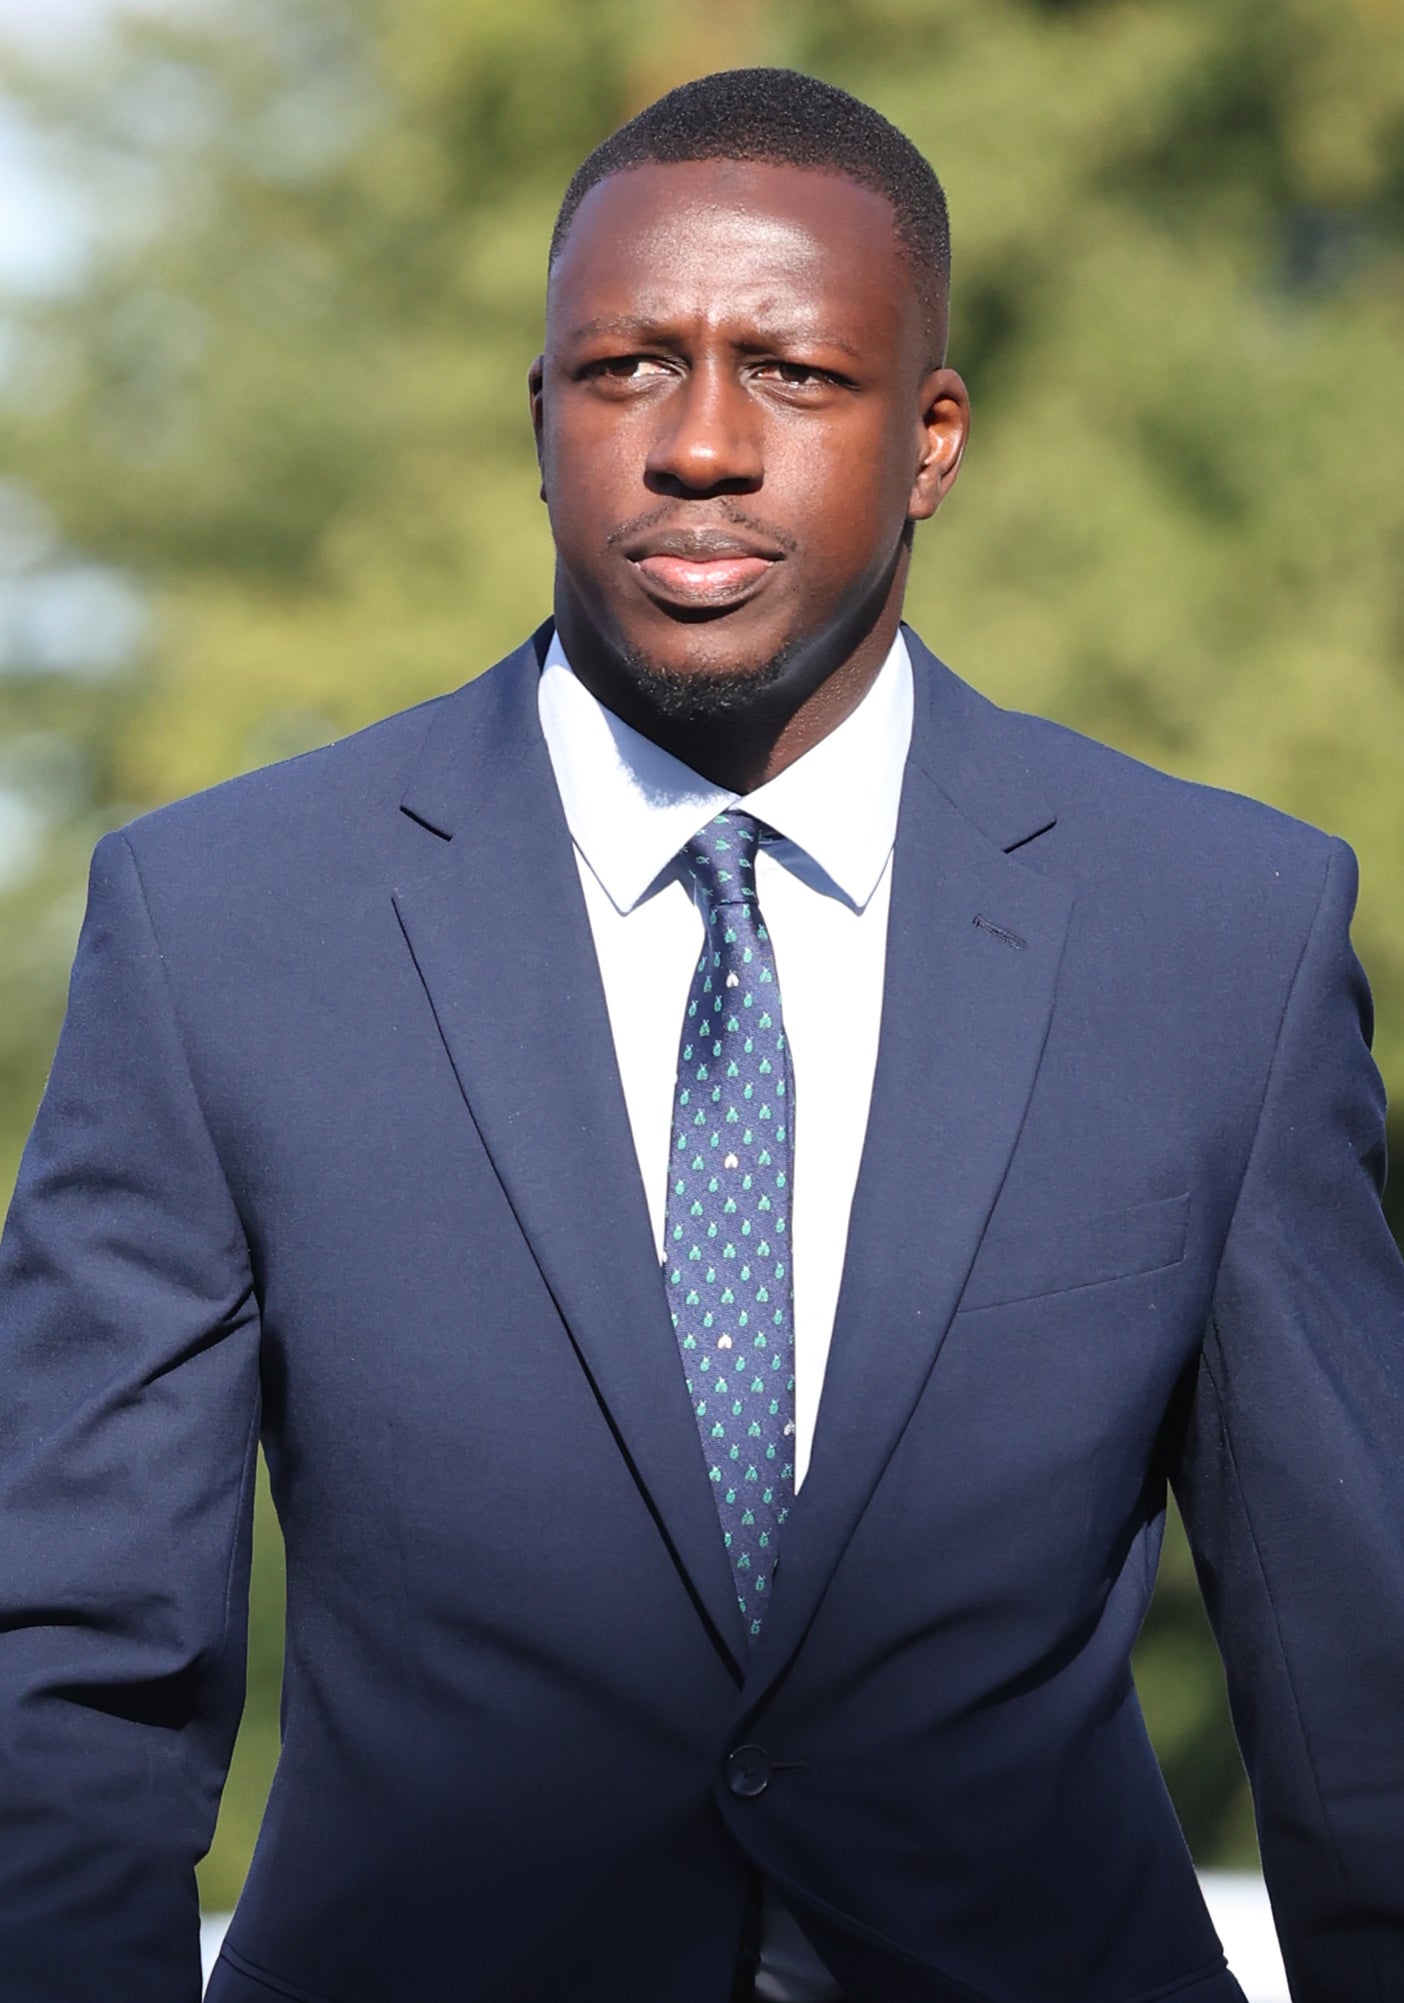 Manchester City footballer Benjamin Mendy arrives at Chester Crown Court where he is accused of eight counts of rape, one count of sexual assault and one count of attempted rape, relating to seven young women. Picture date: Tuesday August 30, 2022 (David Rawcliffe/PA)